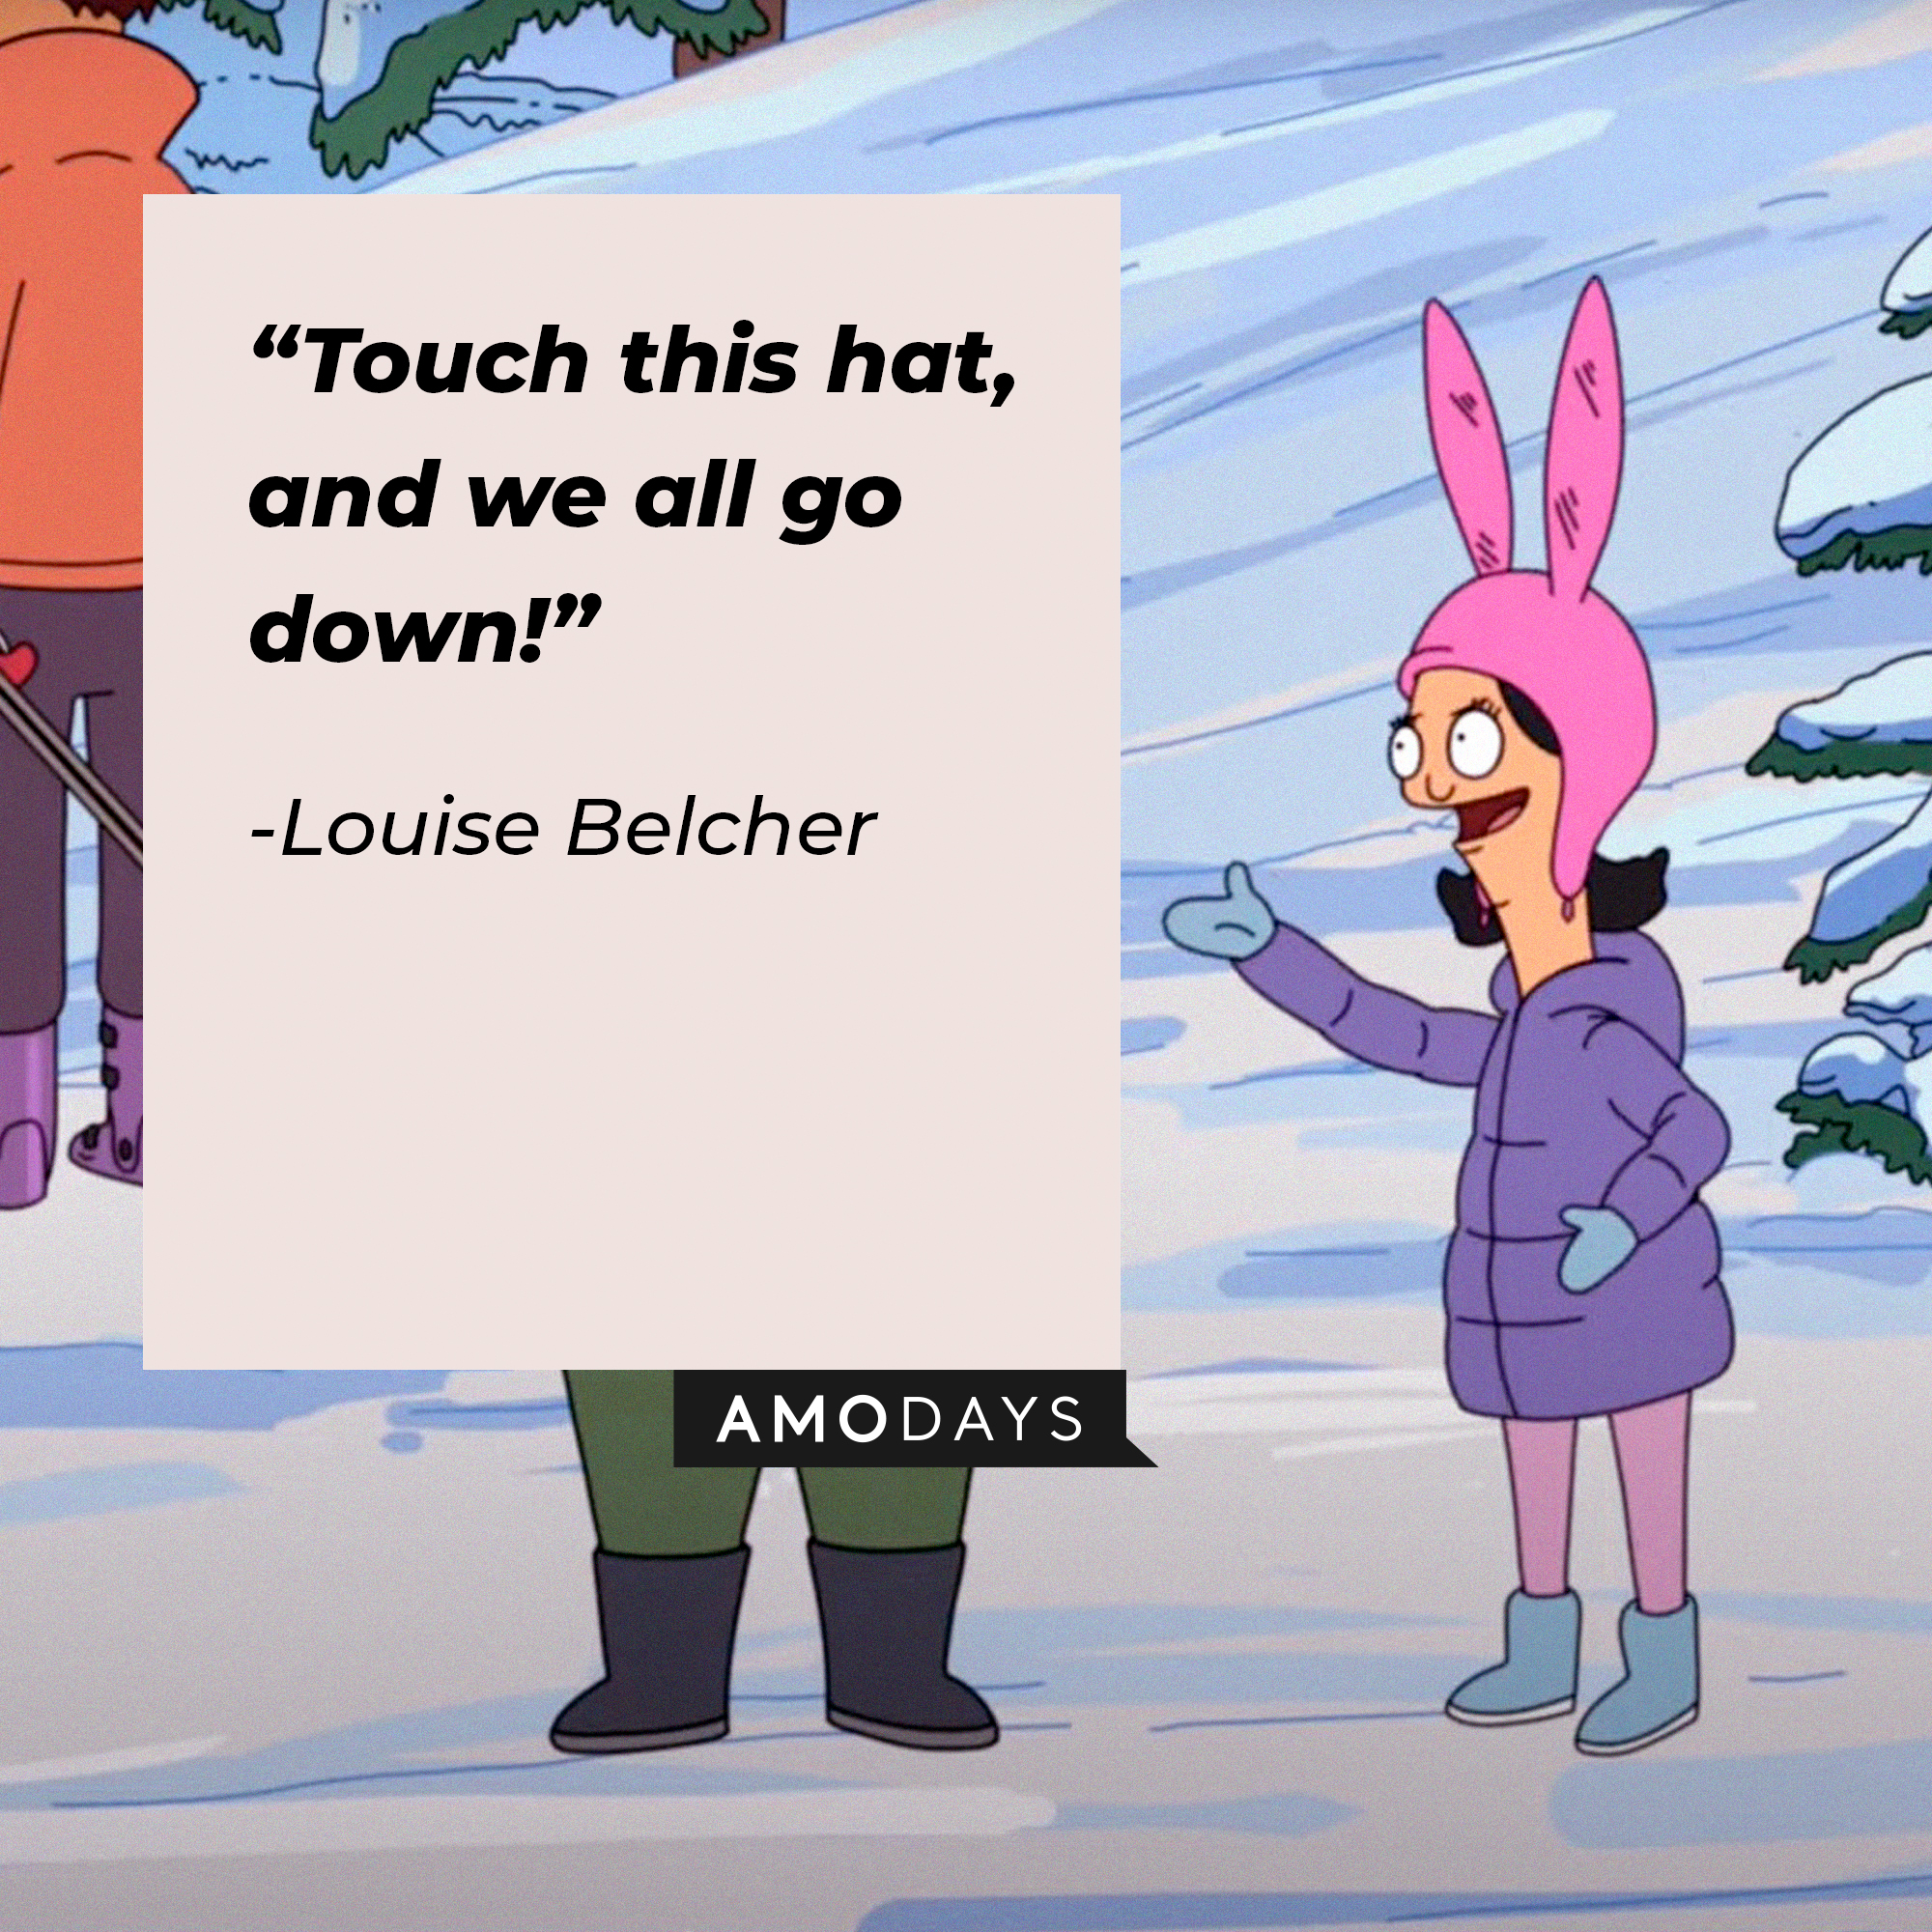 An image of Louise Belcher with her quote: “Touch this hat, and we all go down!” | Source: facebook.com/BobsBurgers